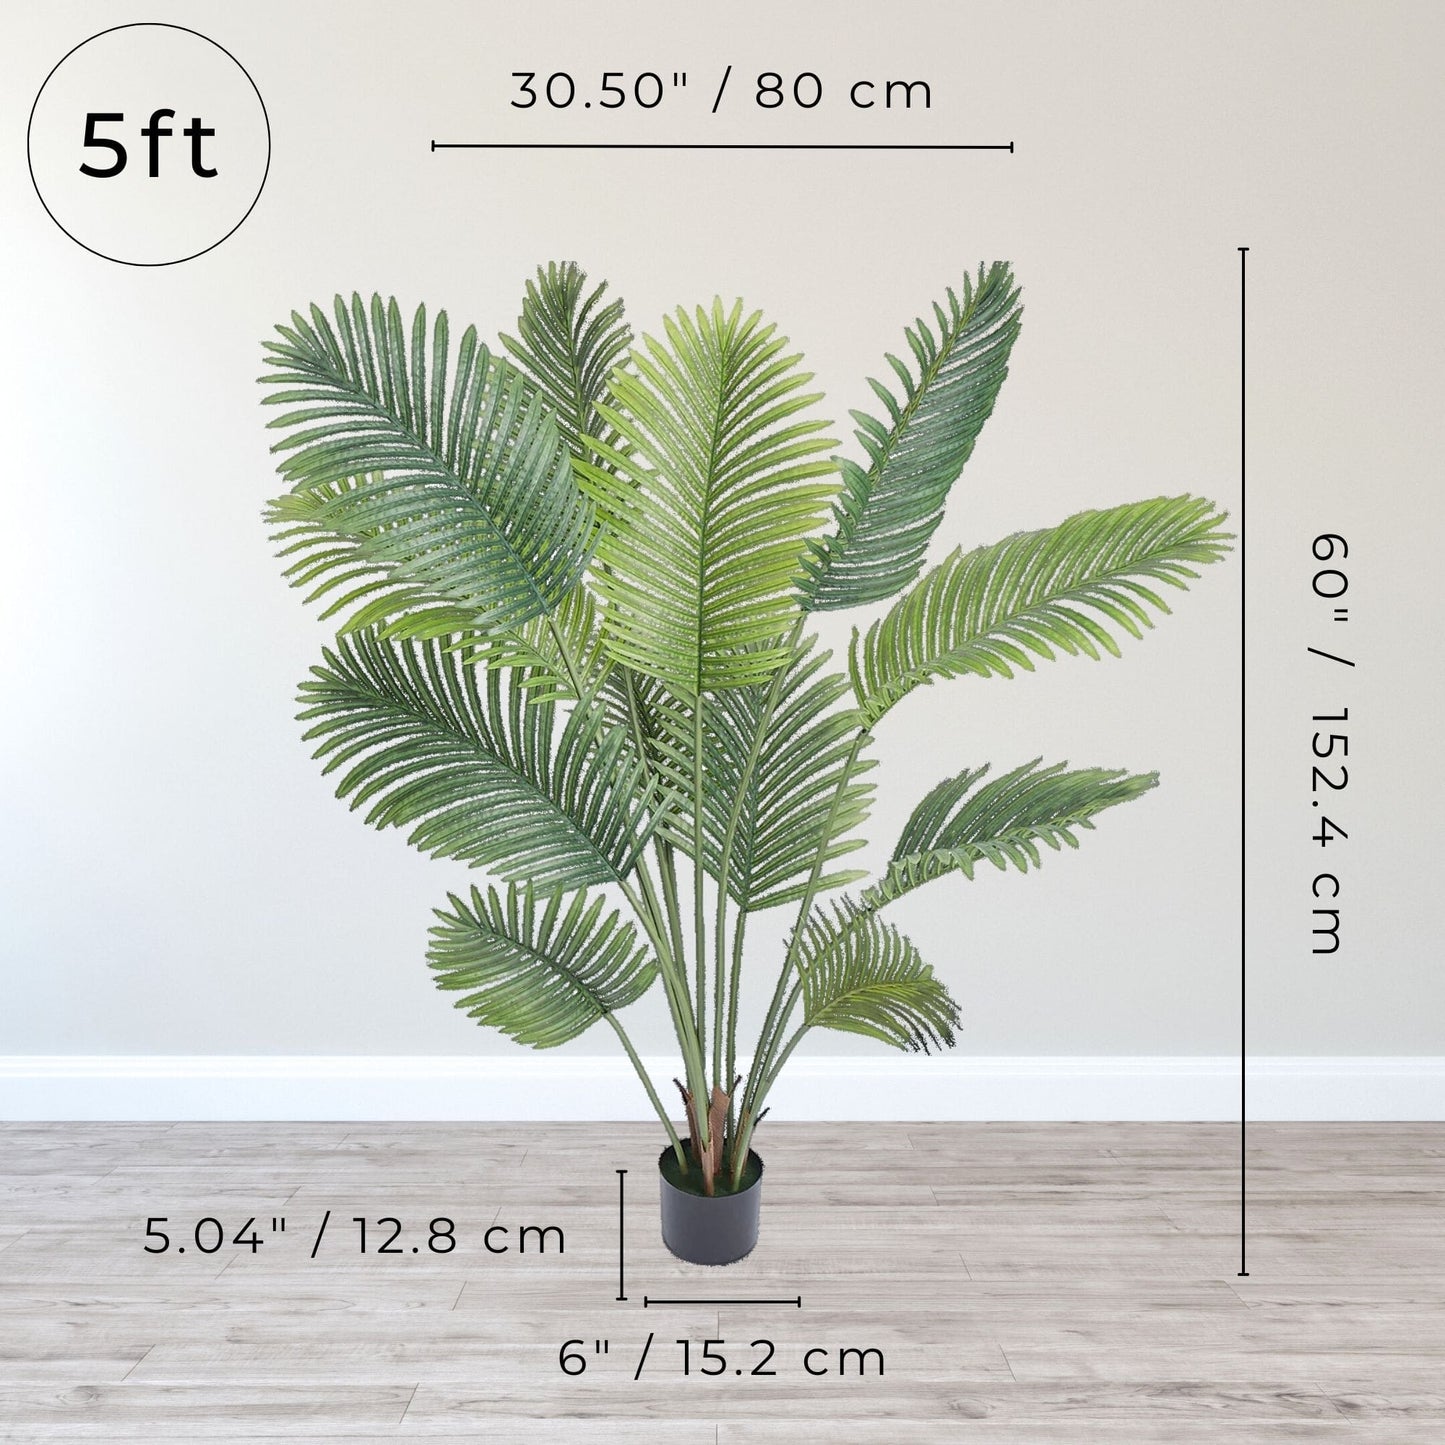 A 5-foot tall artificial palm tree, ideal for adding lush greenery to home or office environments